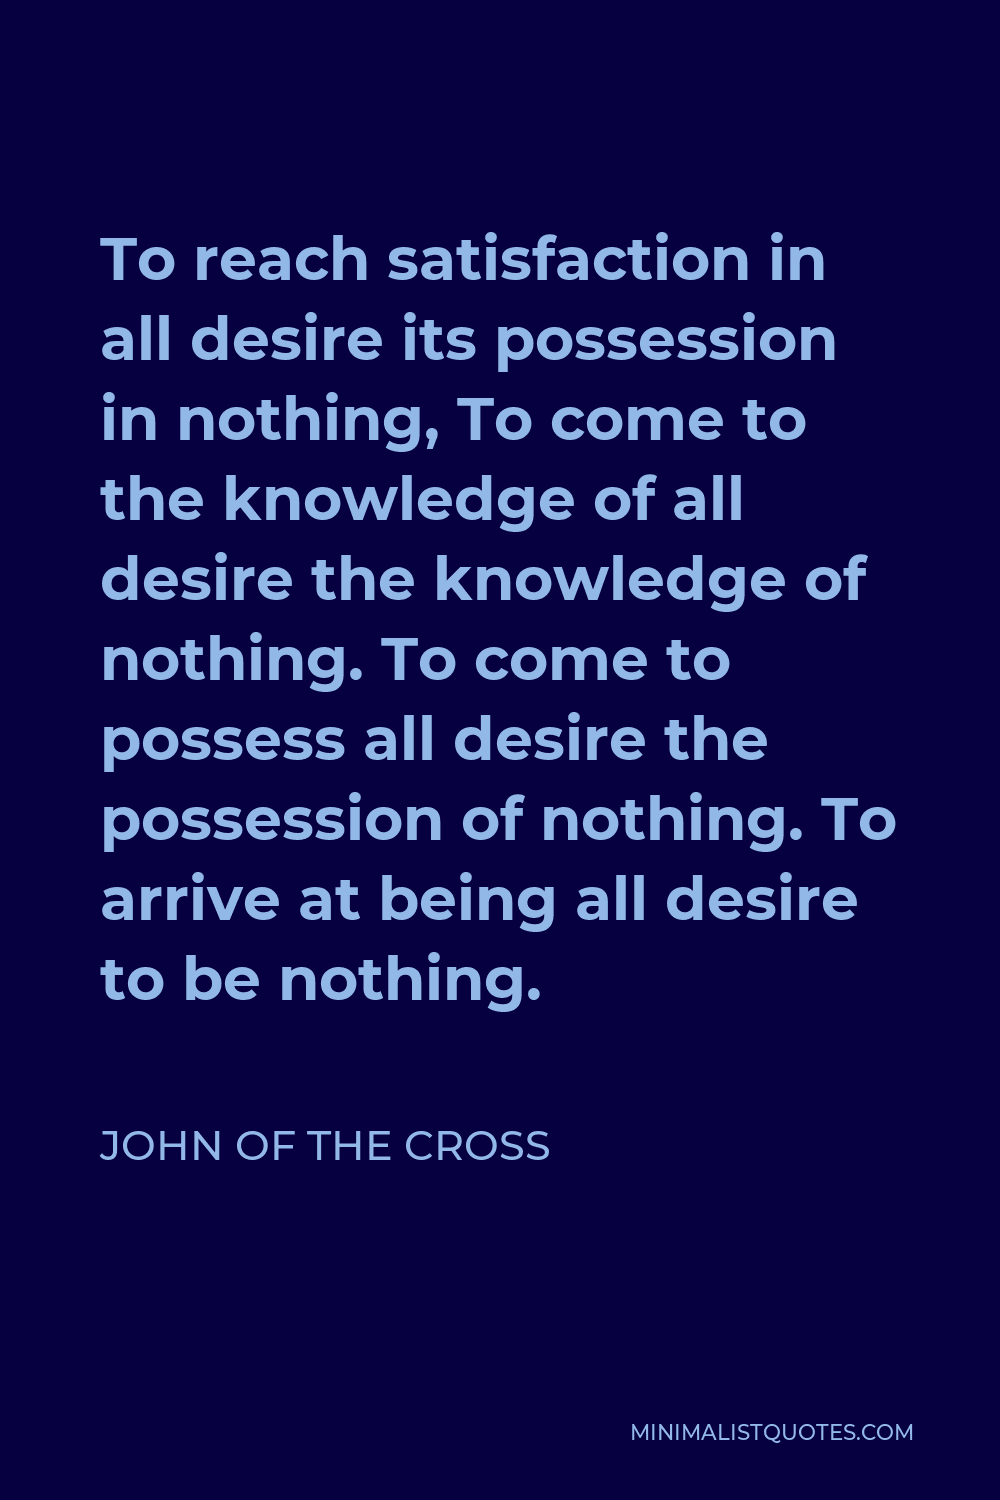 John of the Cross Quote - To reach satisfaction in all desire its possession in nothing, To come to the knowledge of all desire the knowledge of nothing. To come to possess all desire the possession of nothing. To arrive at being all desire to be nothing.